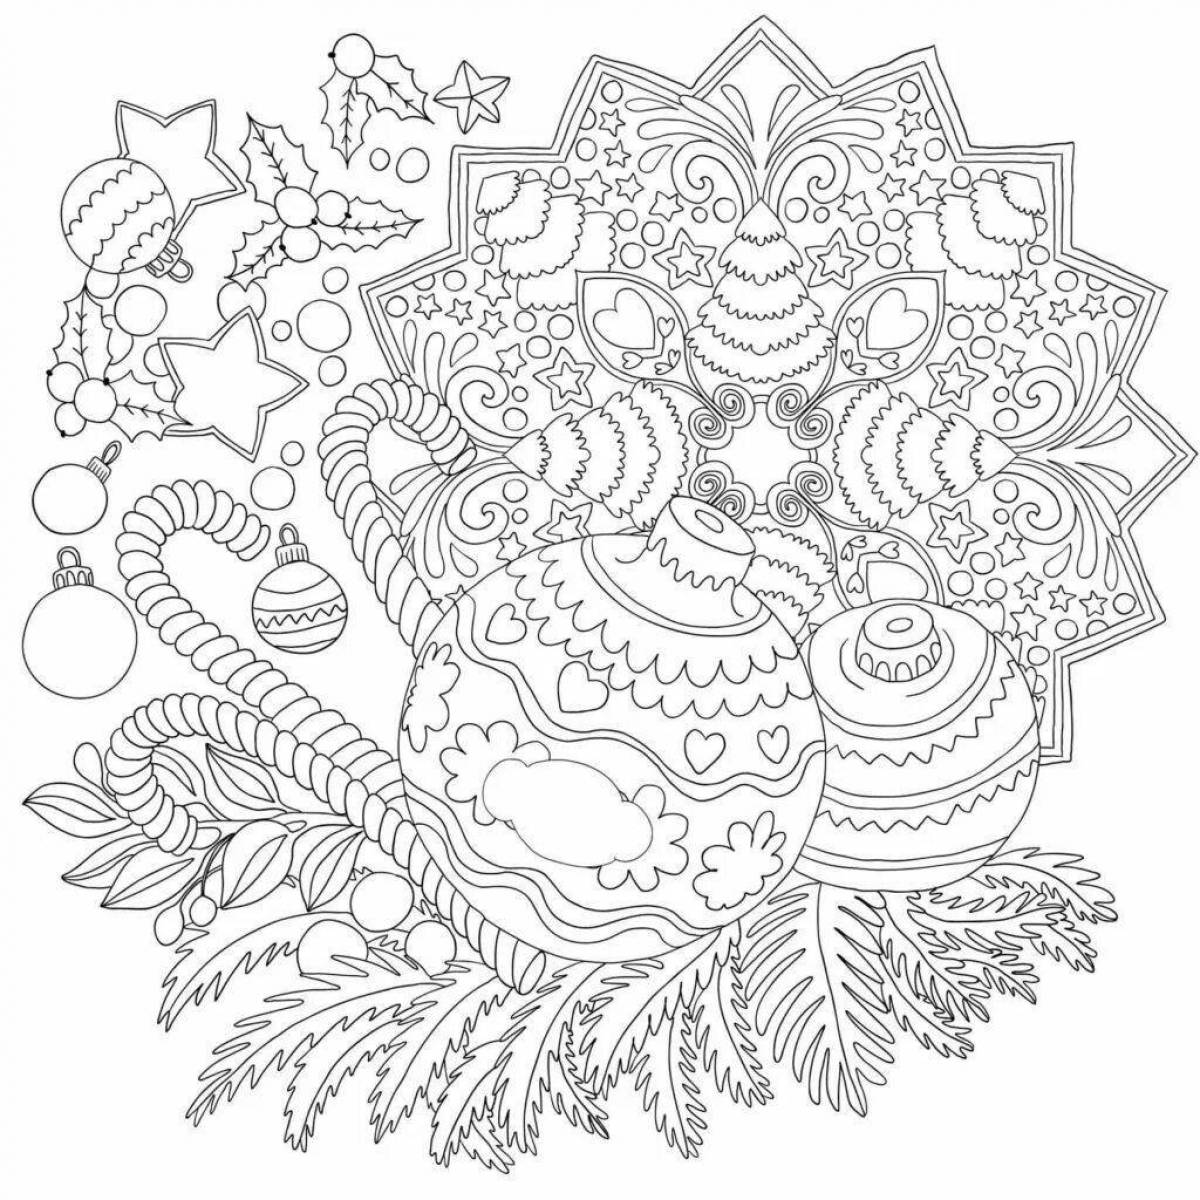 Radiant Christmas coloring book for adults